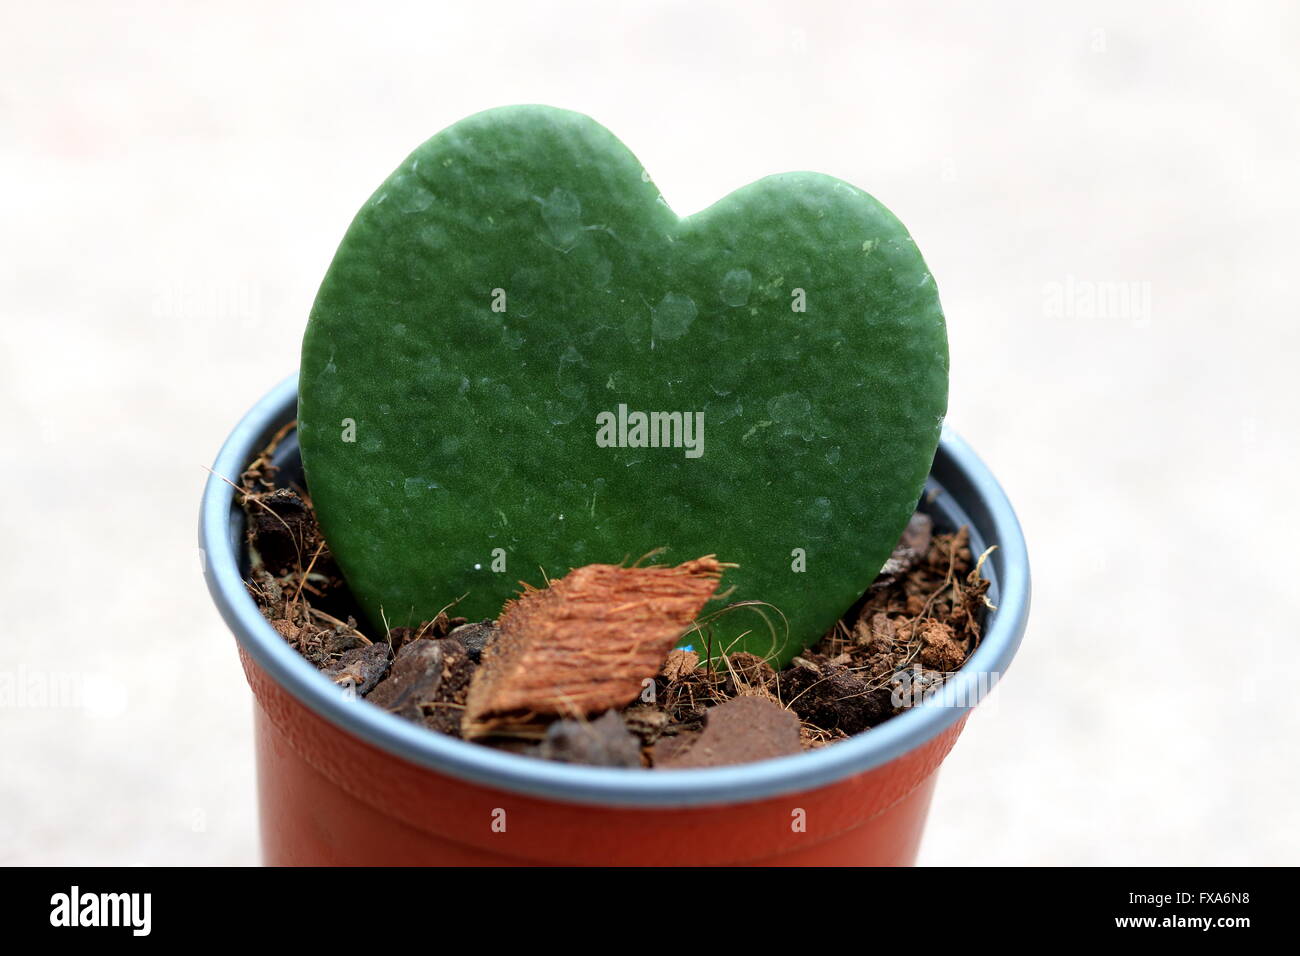 Close up image of  a Love Heart shaped succulent called Hoya kerrii or known as Sweetheart Hoya, The Sweetheart Valentine Hoya Stock Photo